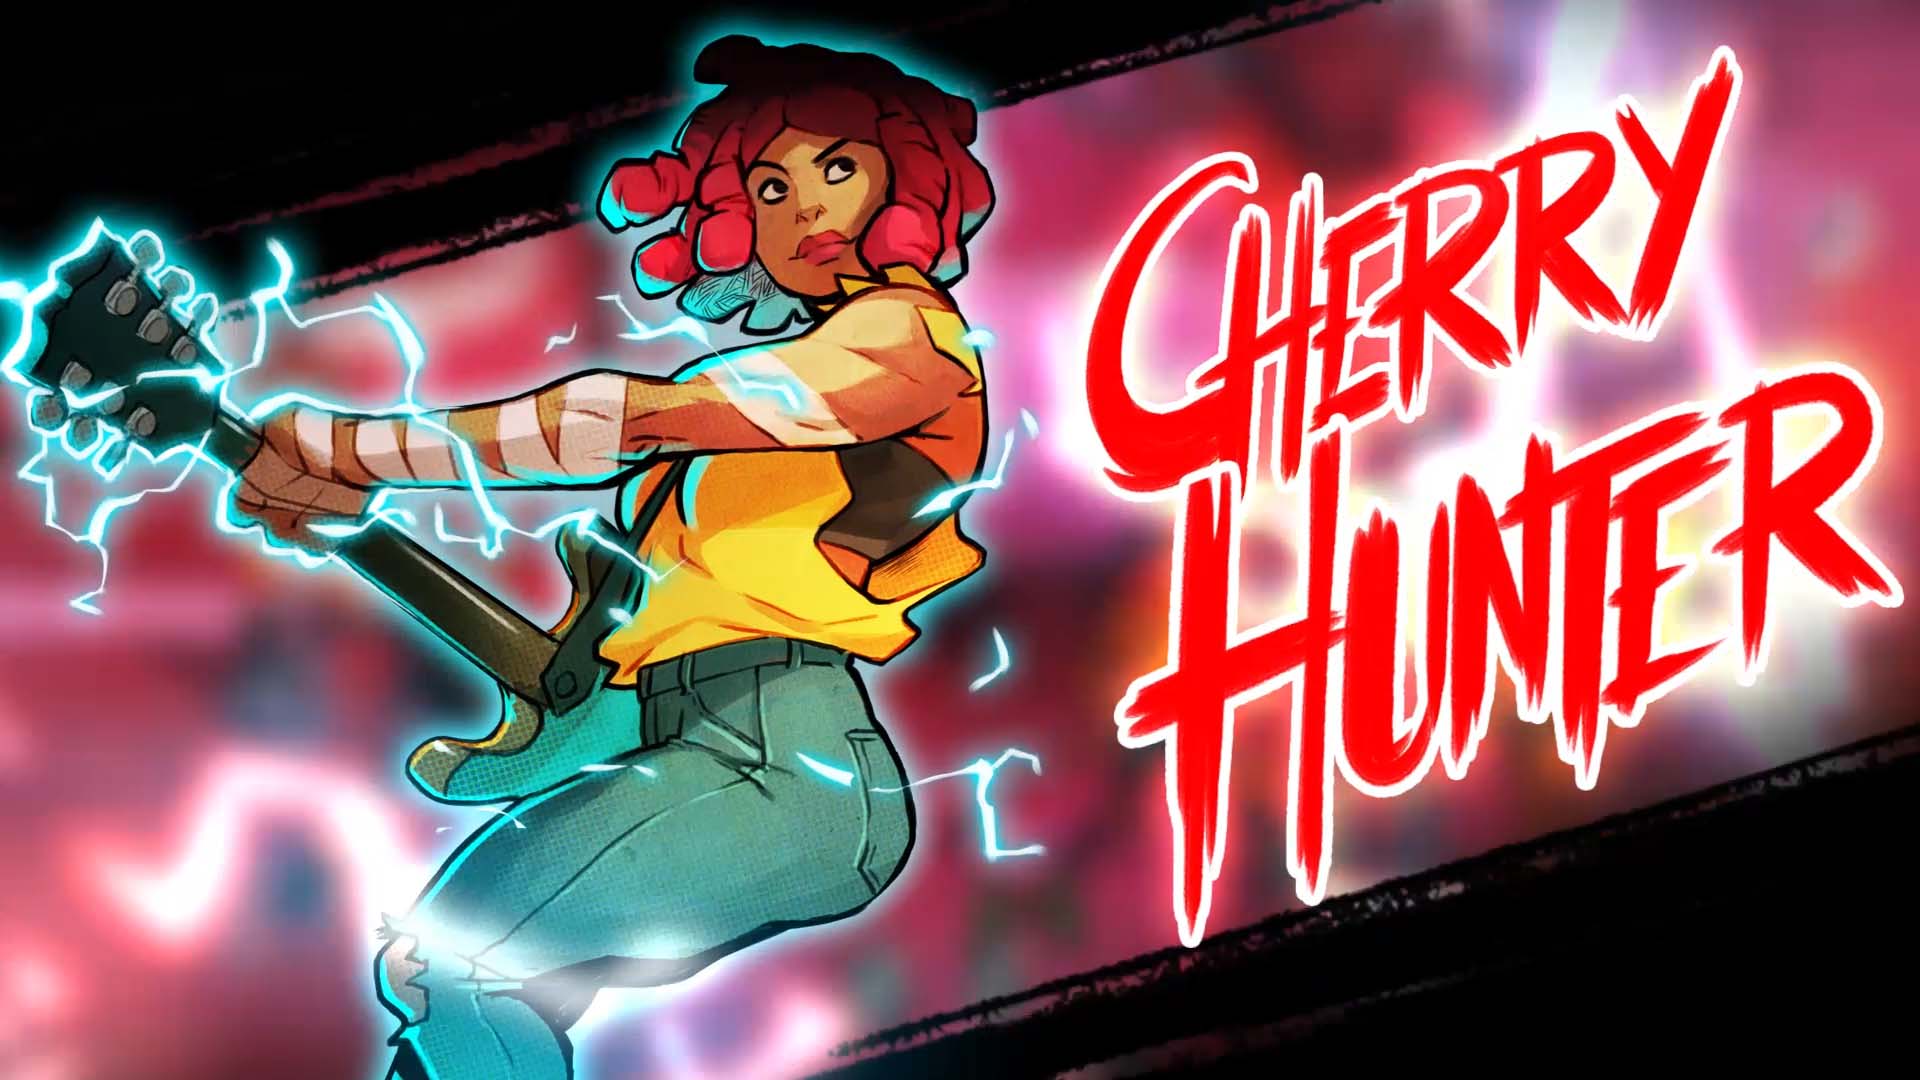 Streets of Rage 4 Launches in 2020, New Character Cherry Hunter Announced